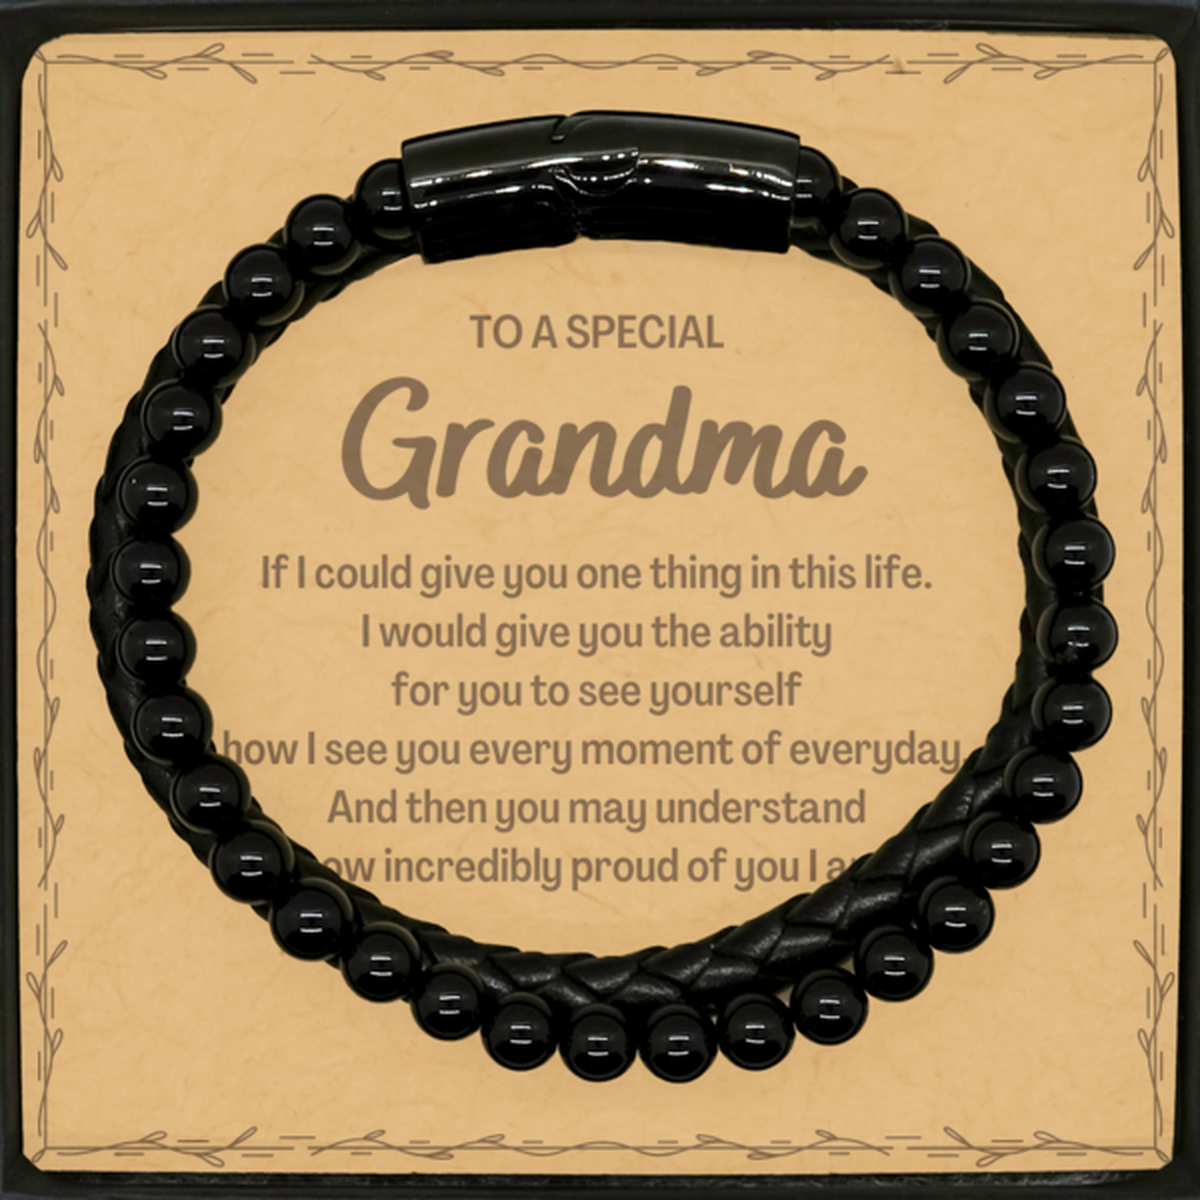 To My Grandma Stone Leather Bracelets, Gifts For Grandma Message Card, Inspirational Gifts for Christmas Birthday, Epic Gifts for Grandma To A Special Grandma how incredibly proud of you I am